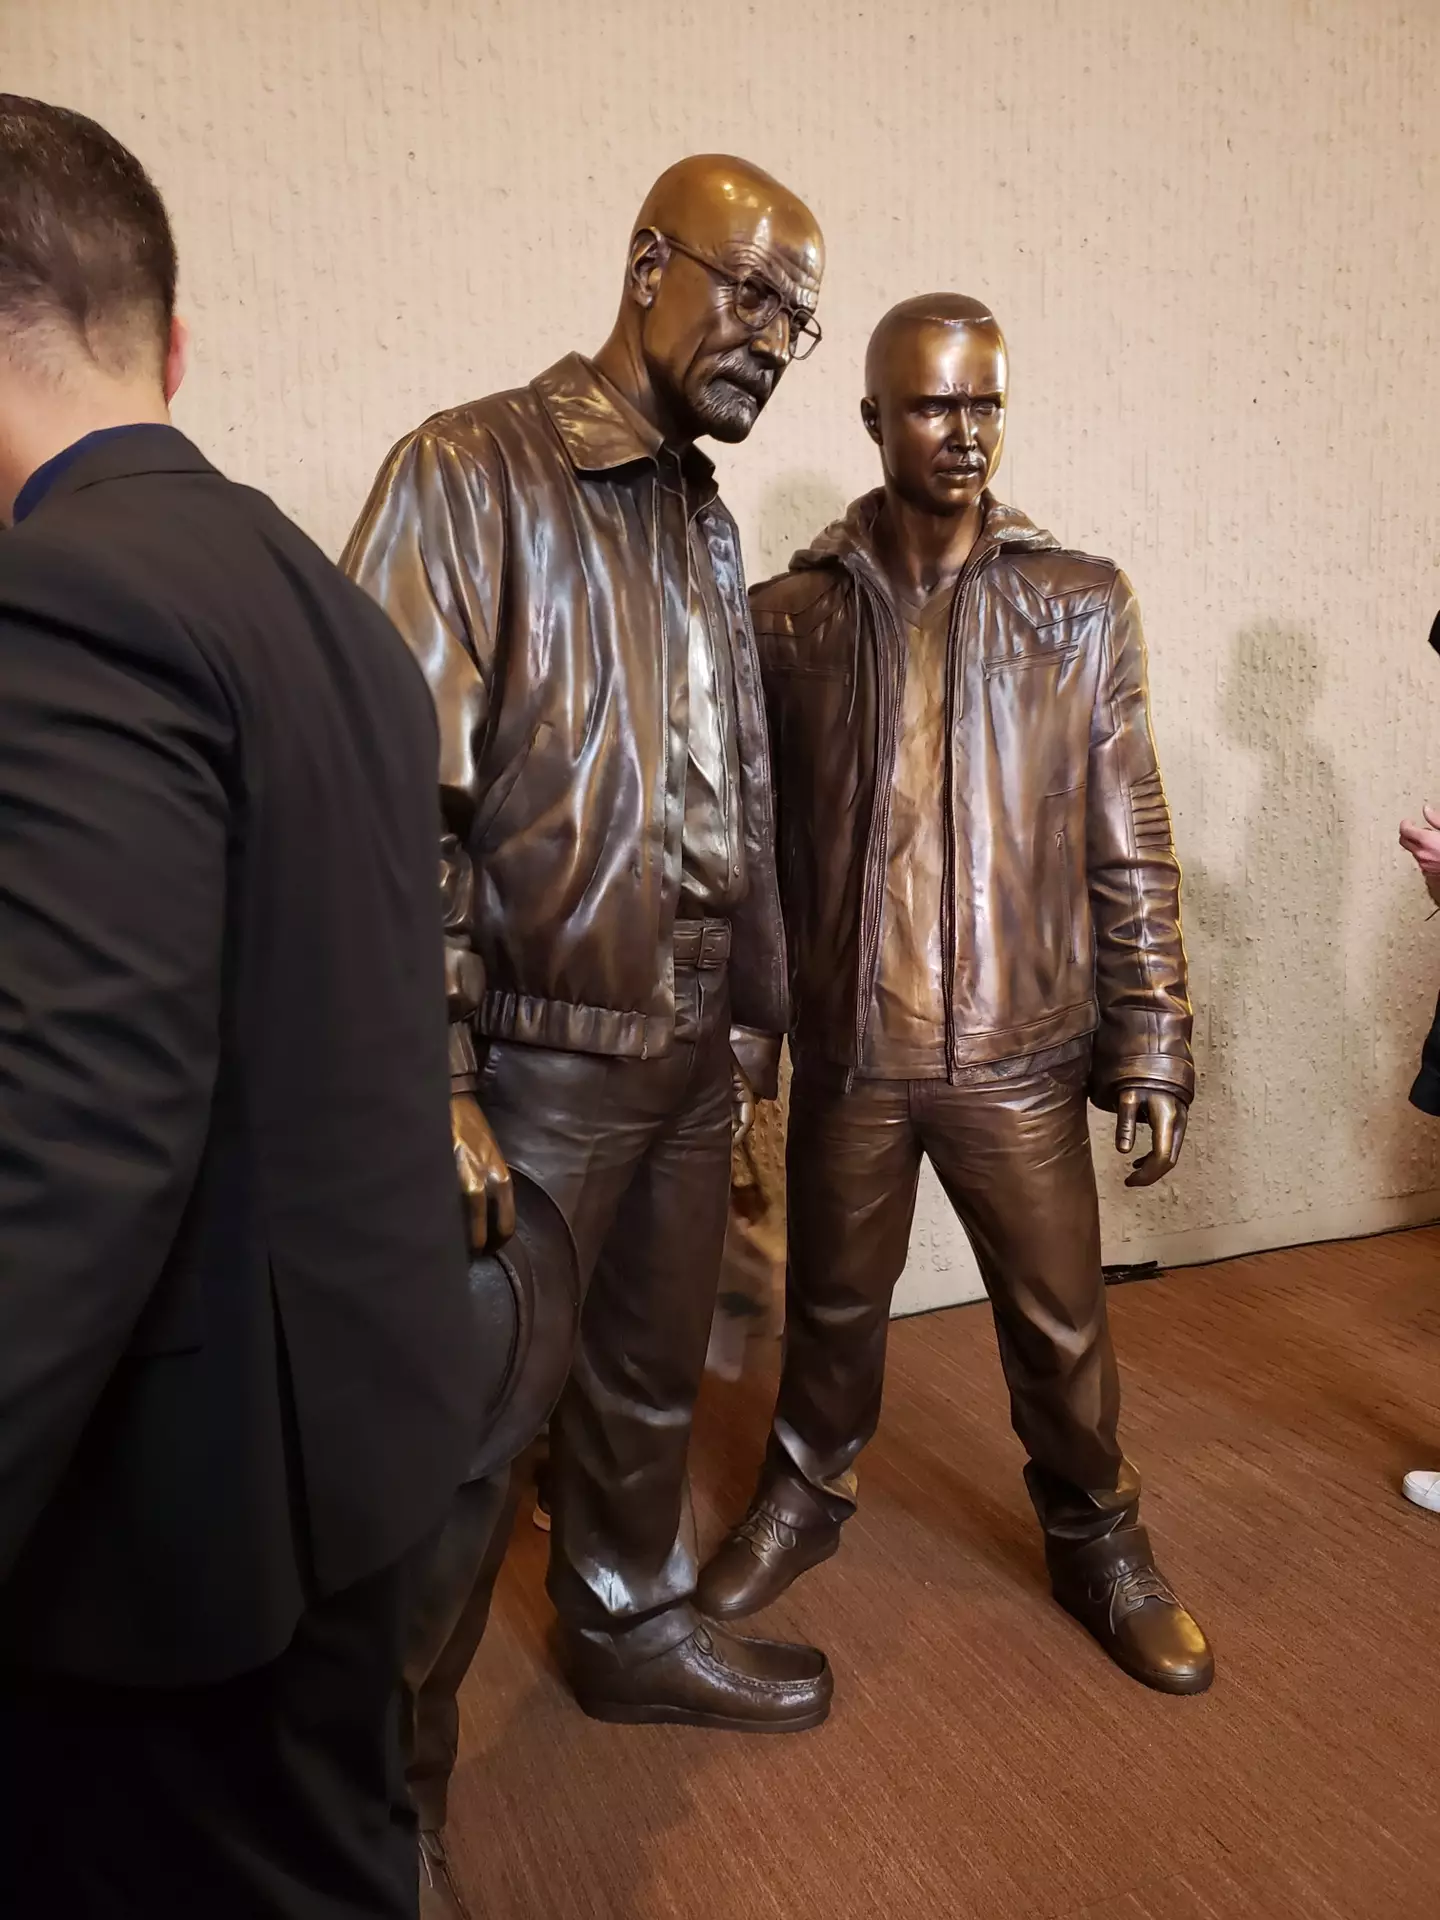 A snap of the statues shared by Breaking Bad writer Thomas Schnauz.